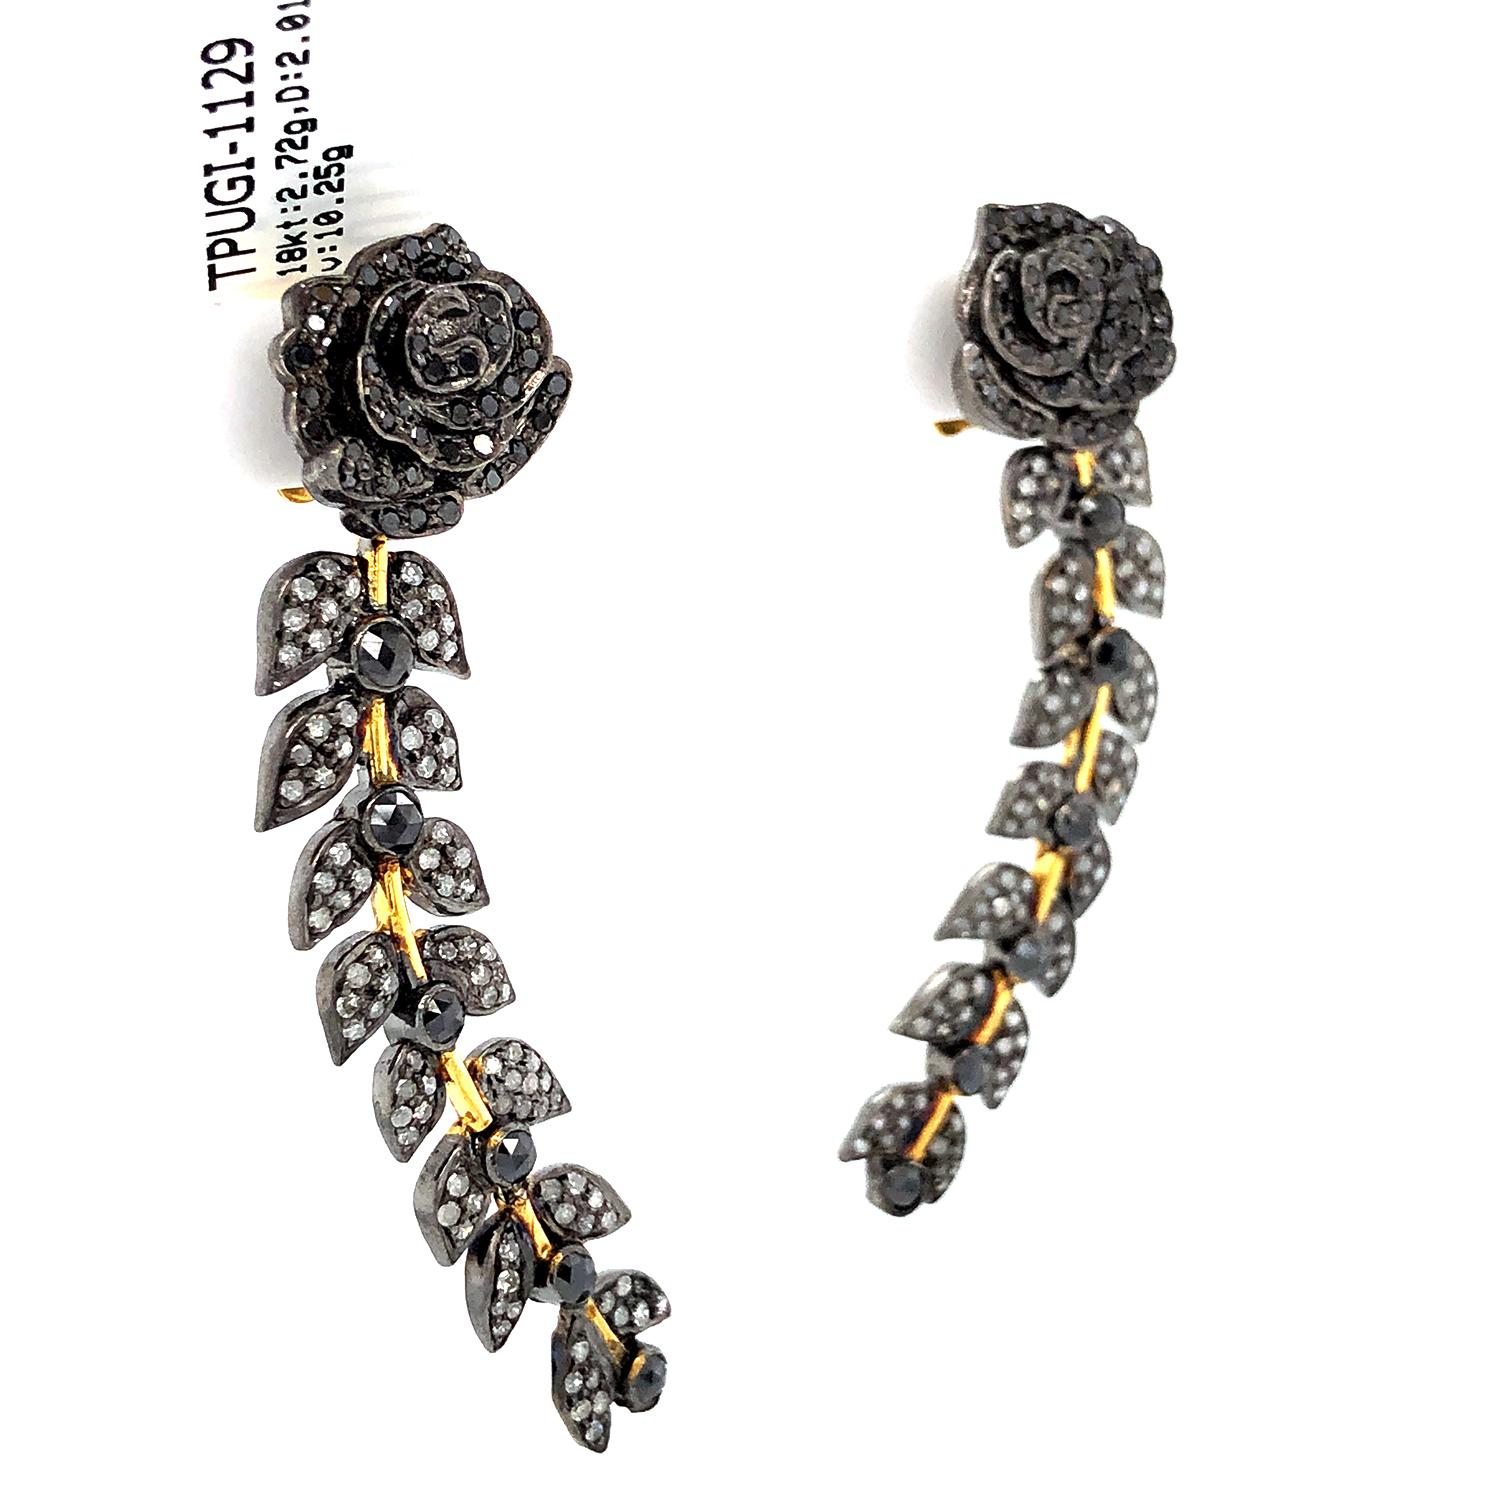 Mixed Cut Flower With Leaf Shaped Earrings With Diamonds Made In 18k Yellow Gold & Silver For Sale